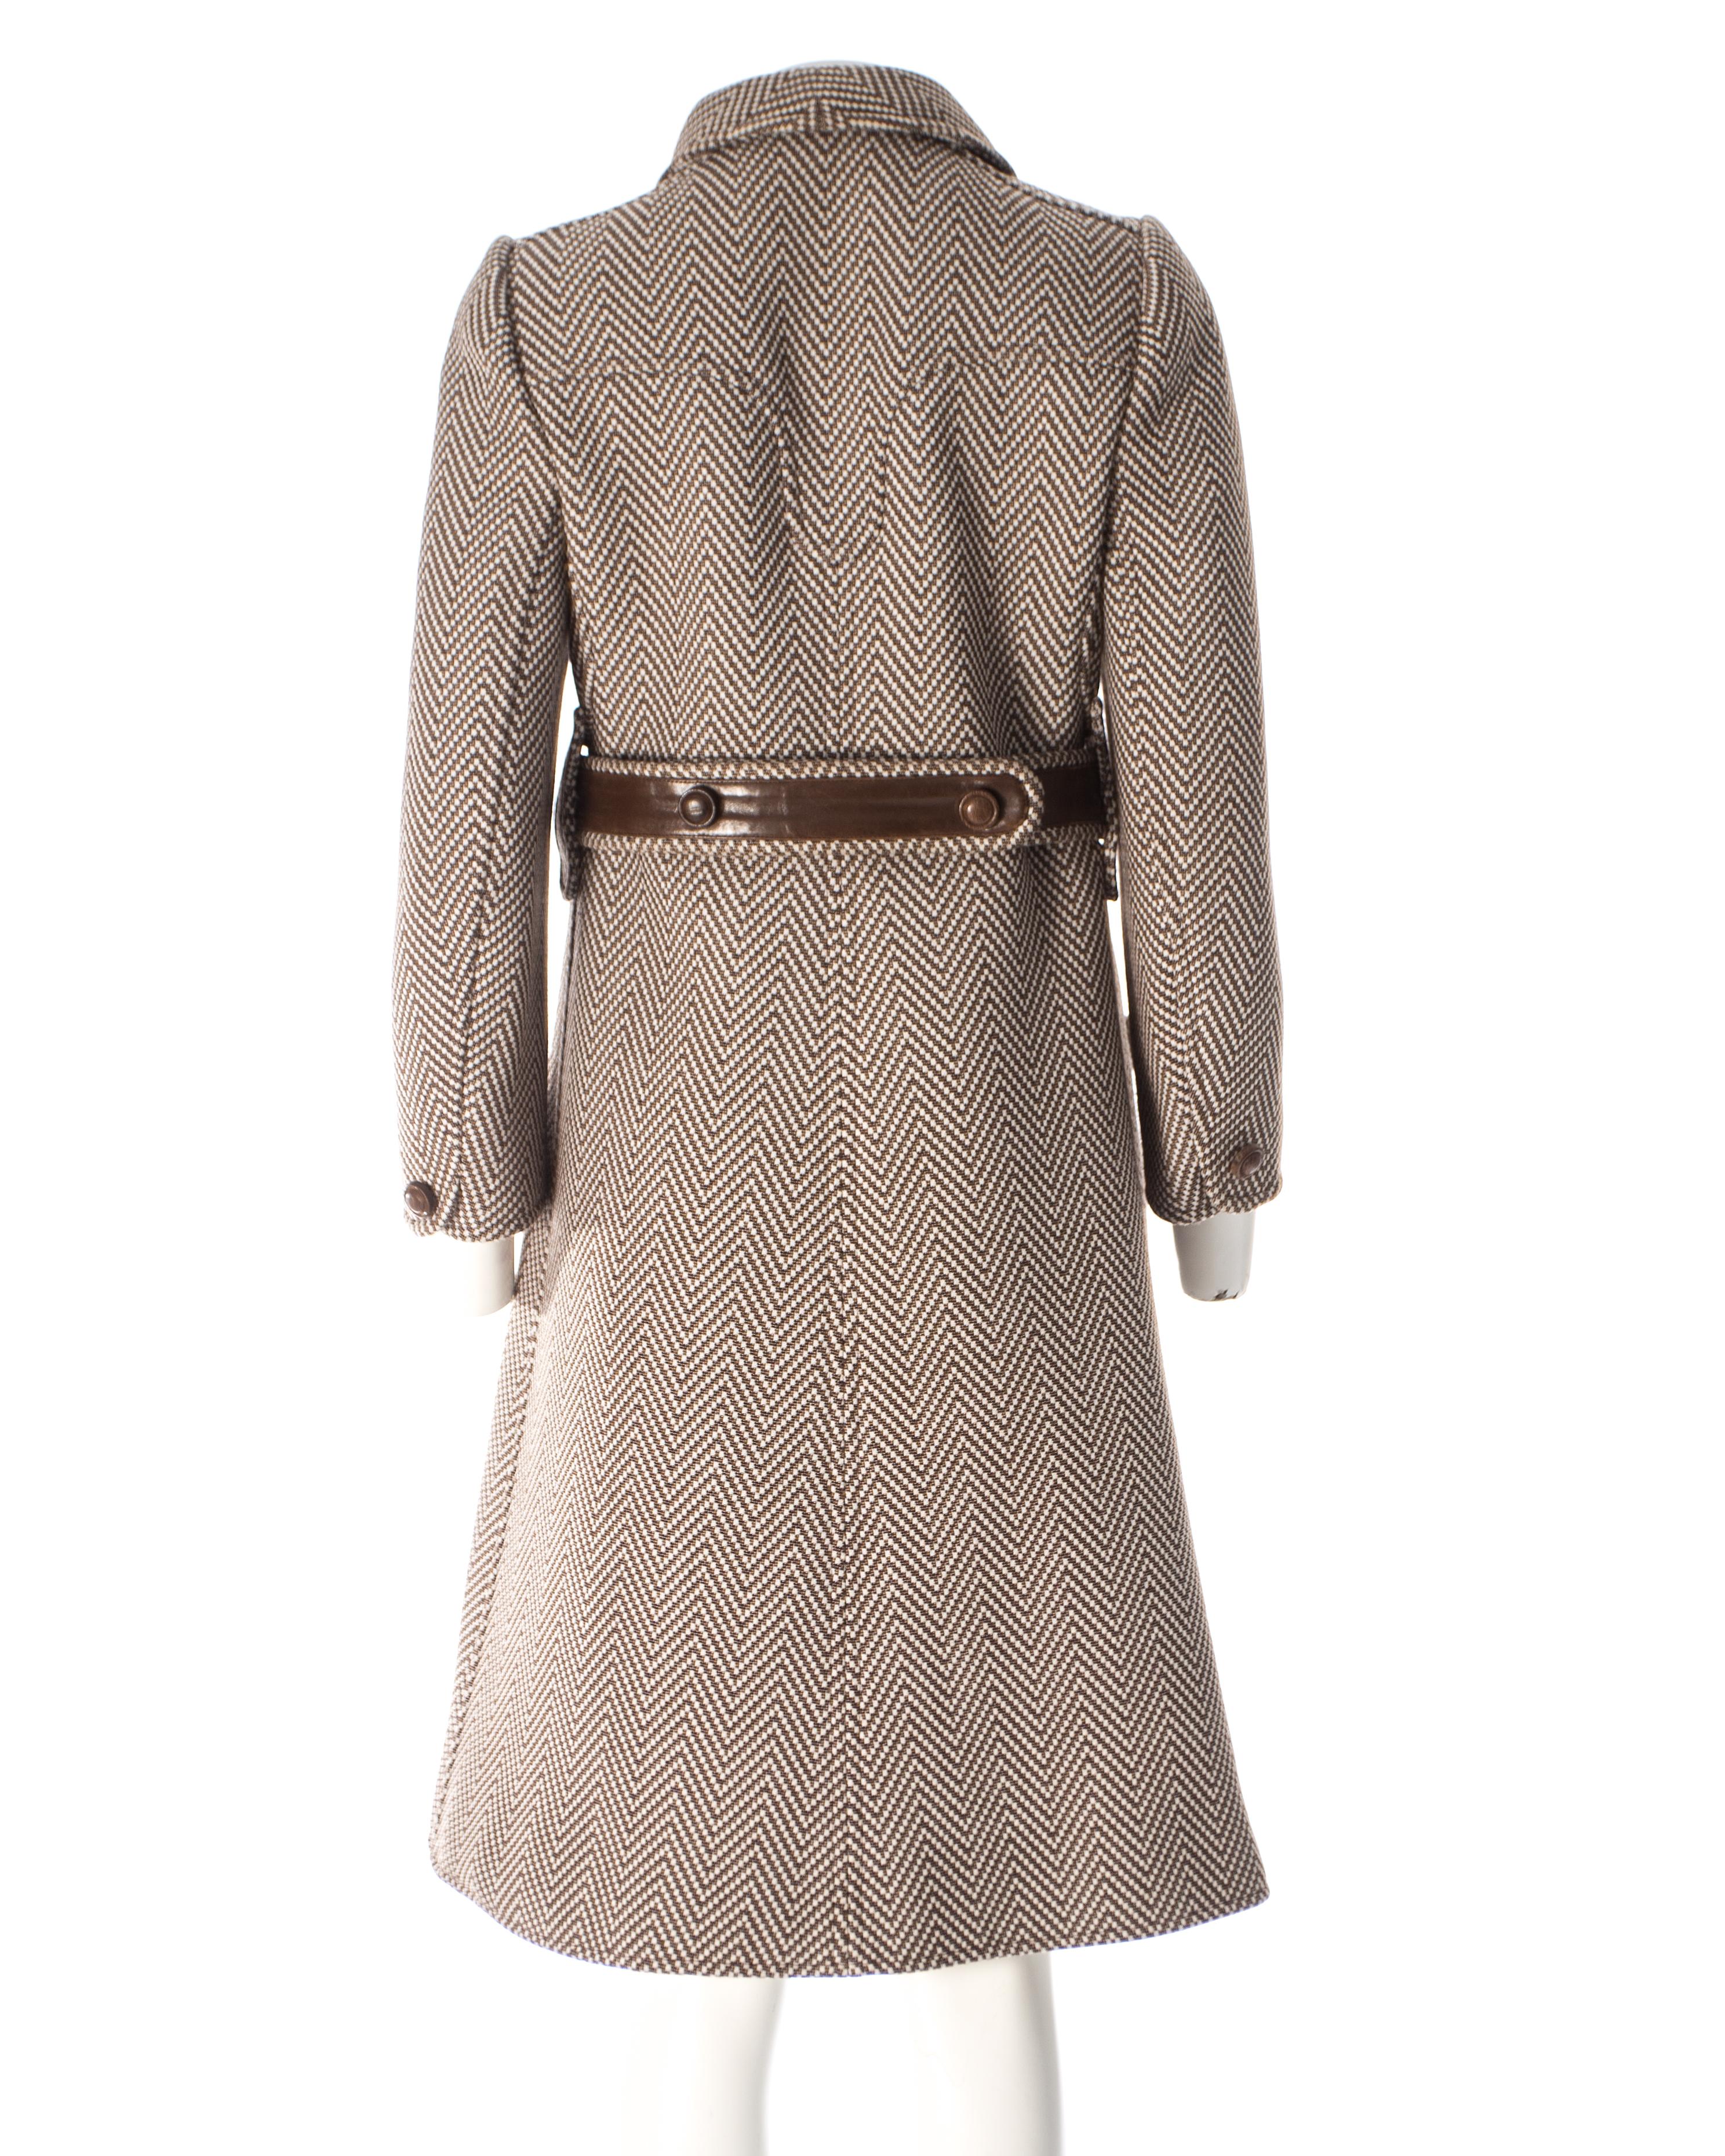 Courreges Couture Brown and cream Herringbone wool and leather coat, circa 1969 1